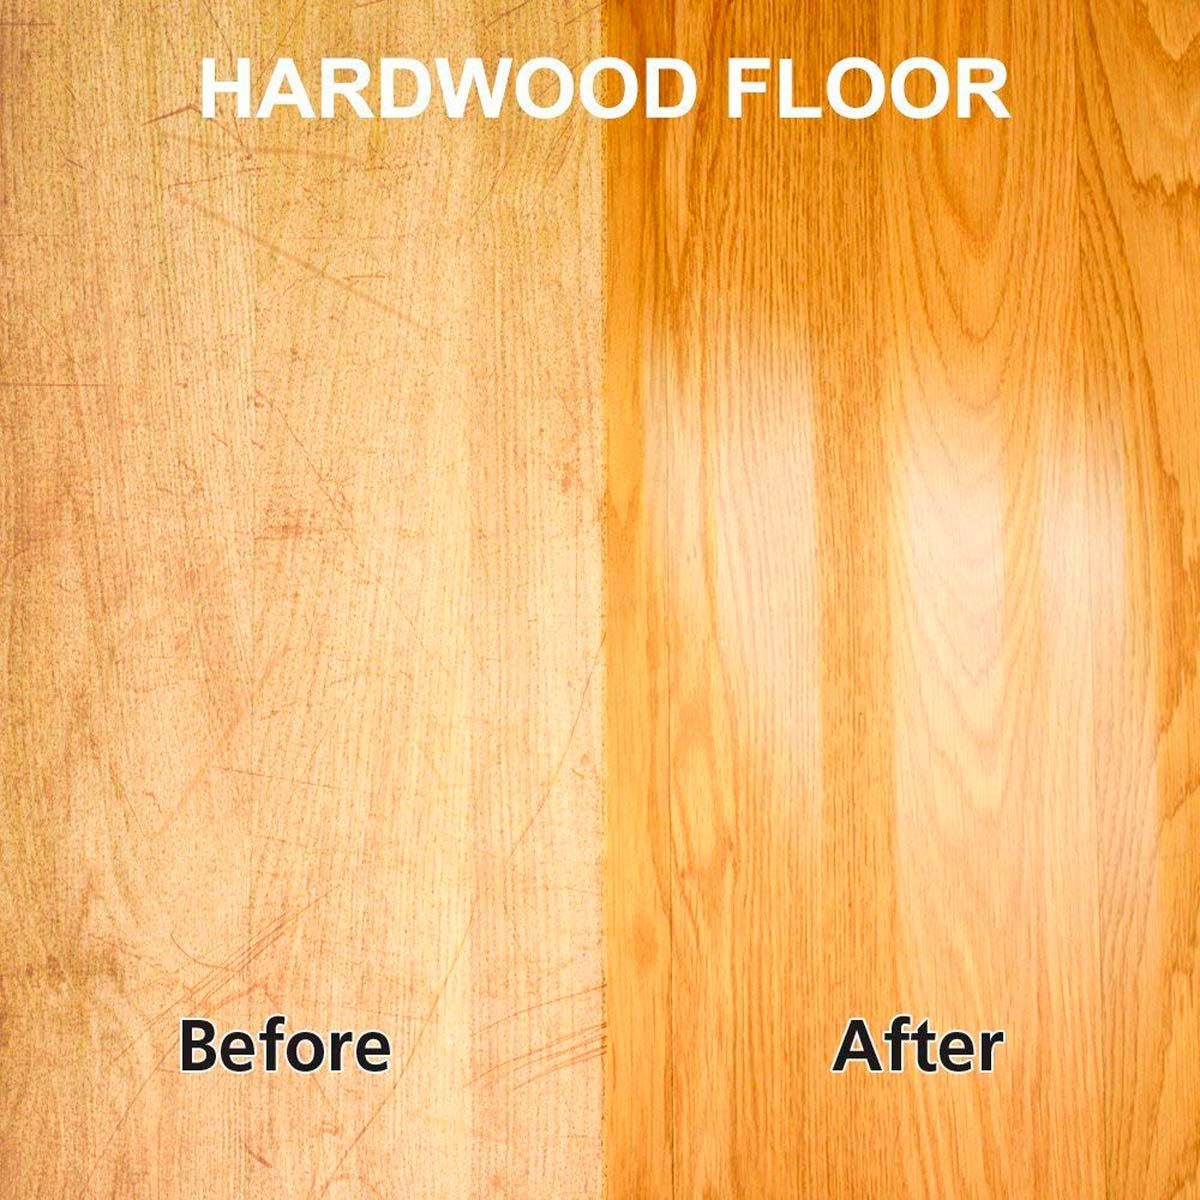 Want Shiny Hardwood Floors Here S How, What Is The Best Way To Clean Hardwood Floors With Polyurethane